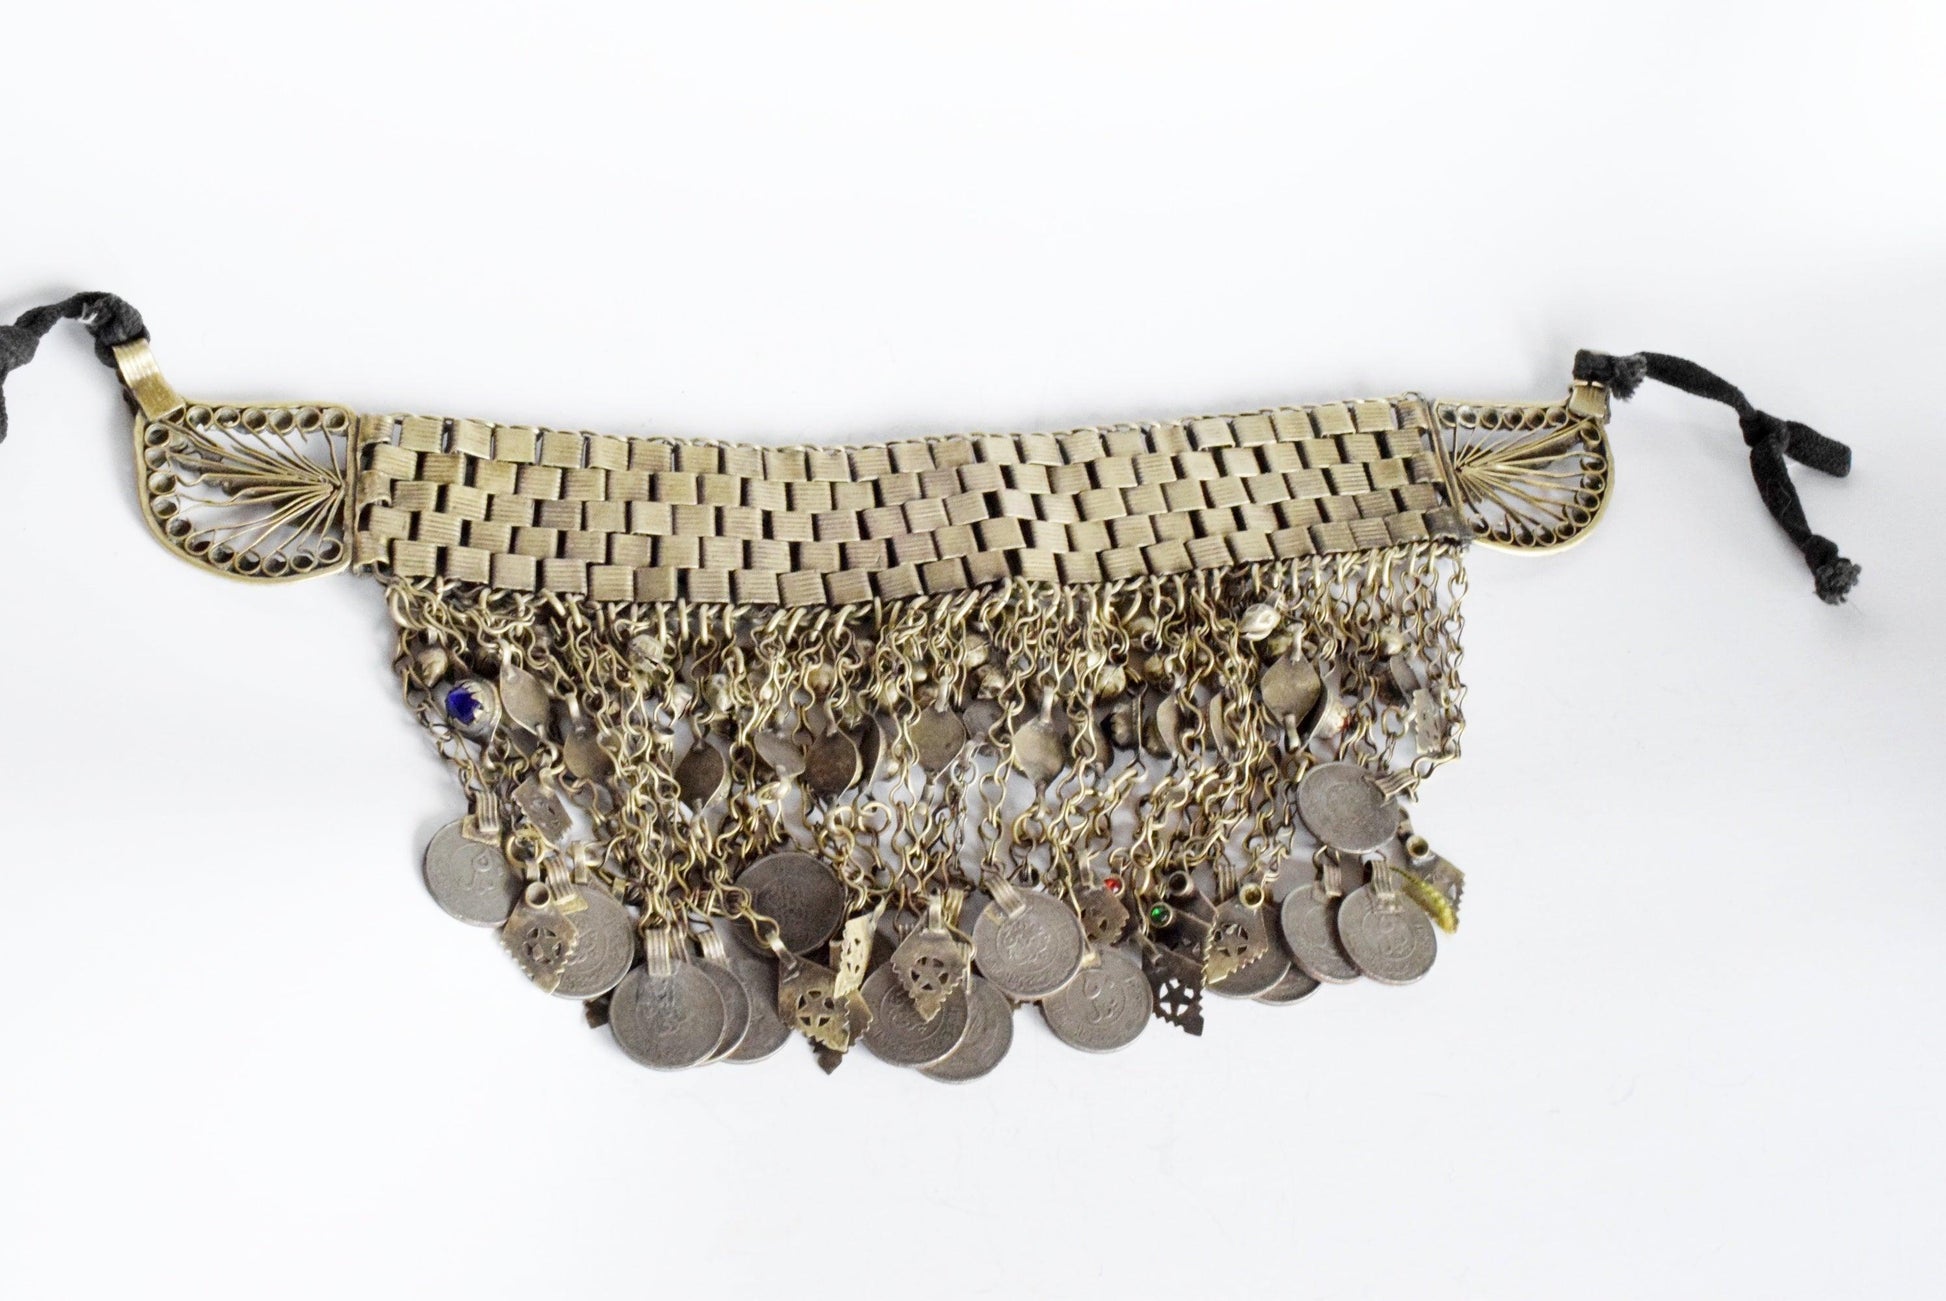 Vintage Kuchi Choker Necklace with Old Coins - Anteeka